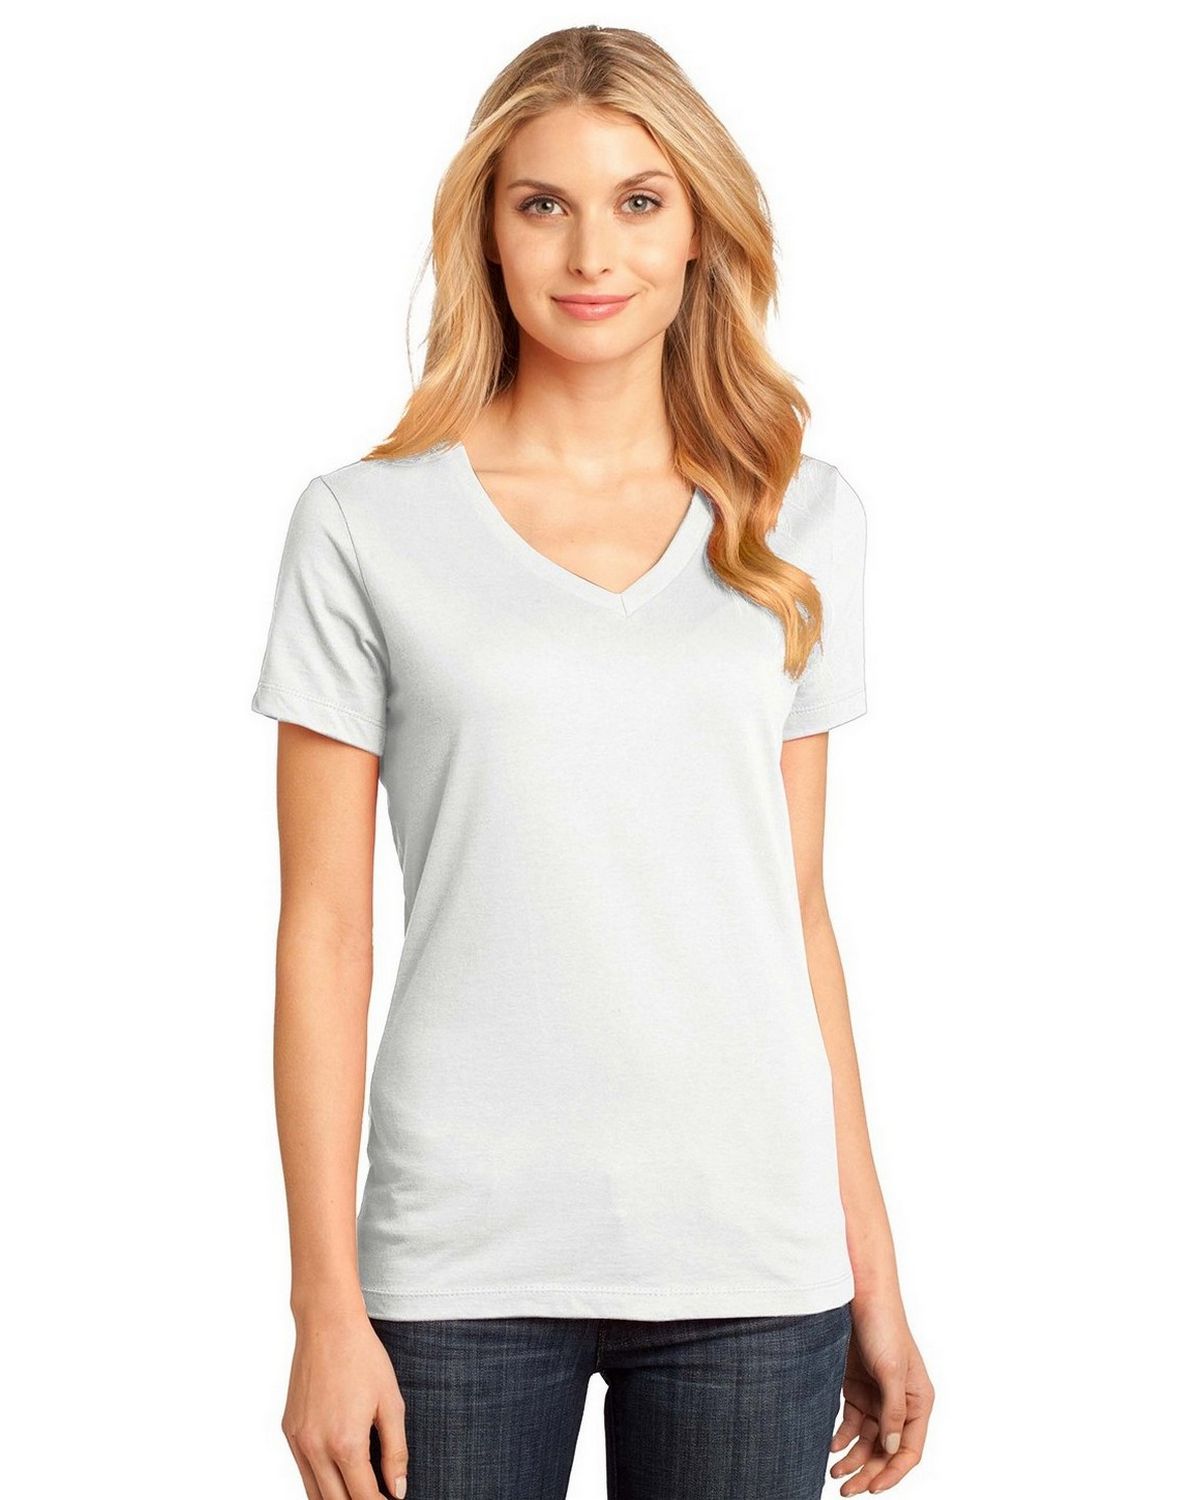 buy-district-made-dm1170l-ladies-perfect-v-neck-tee